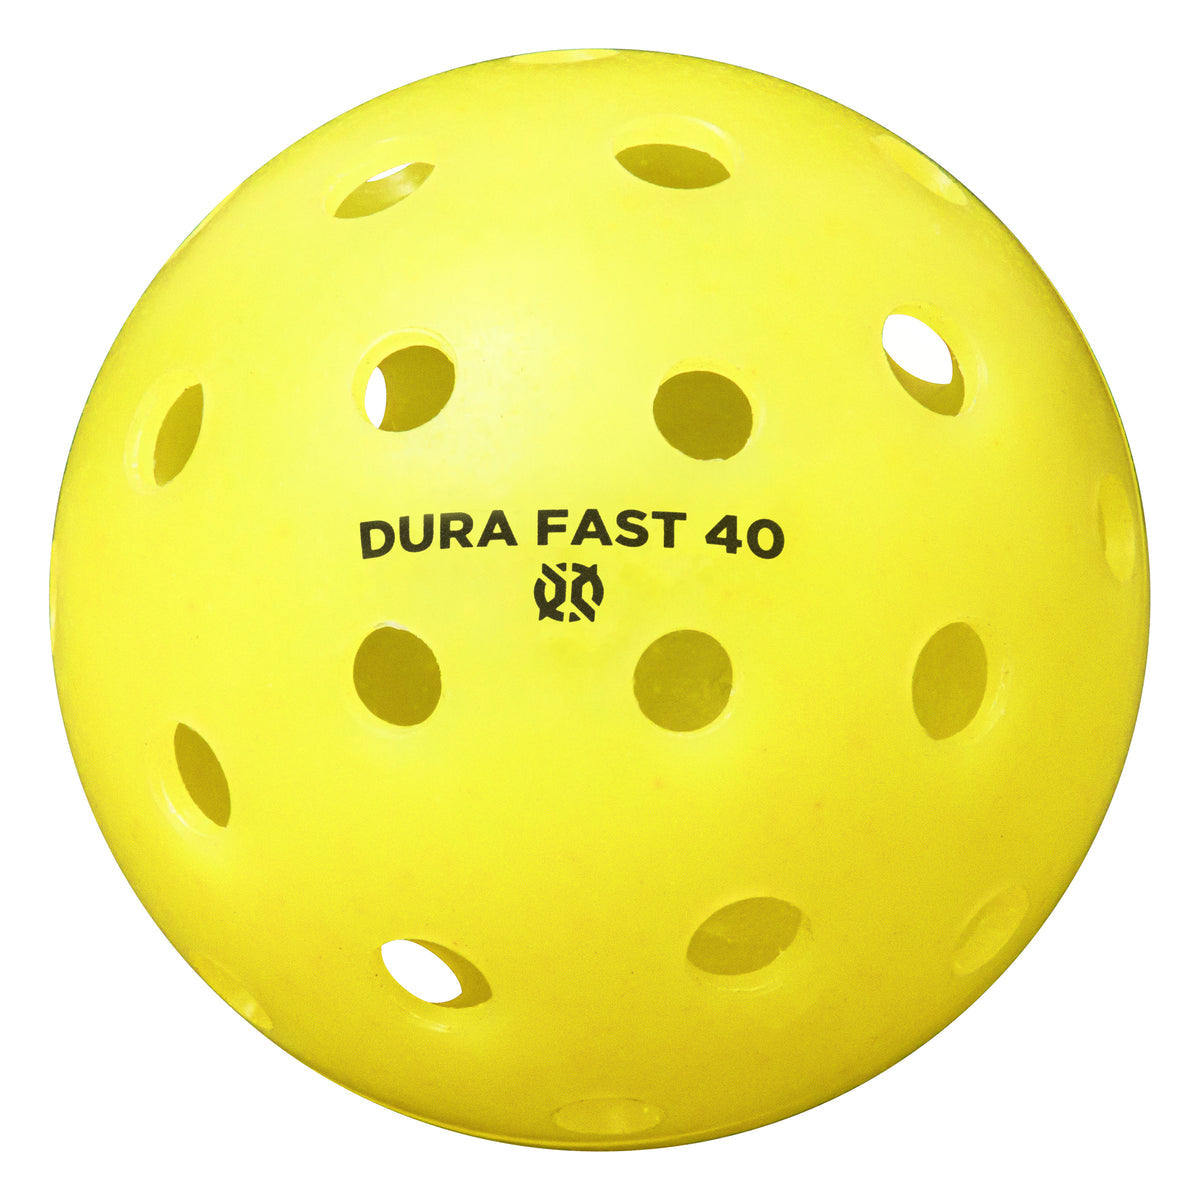 An Onix Dura Fast 40 Pickleball Ball with the brand name Onix on it.